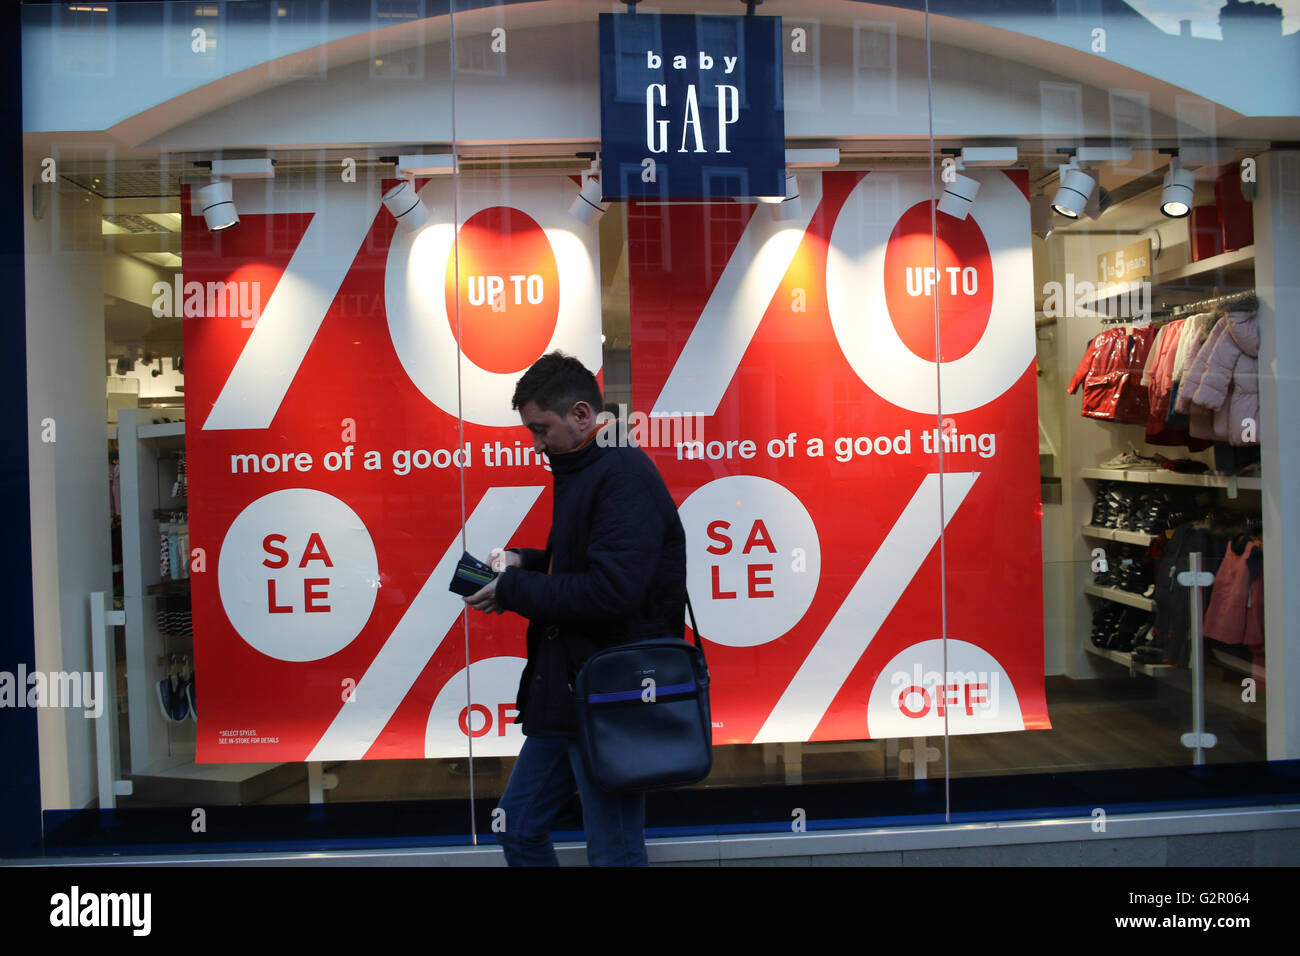 Baby Gap Store High Resolution Stock Photography and Images - Alamy